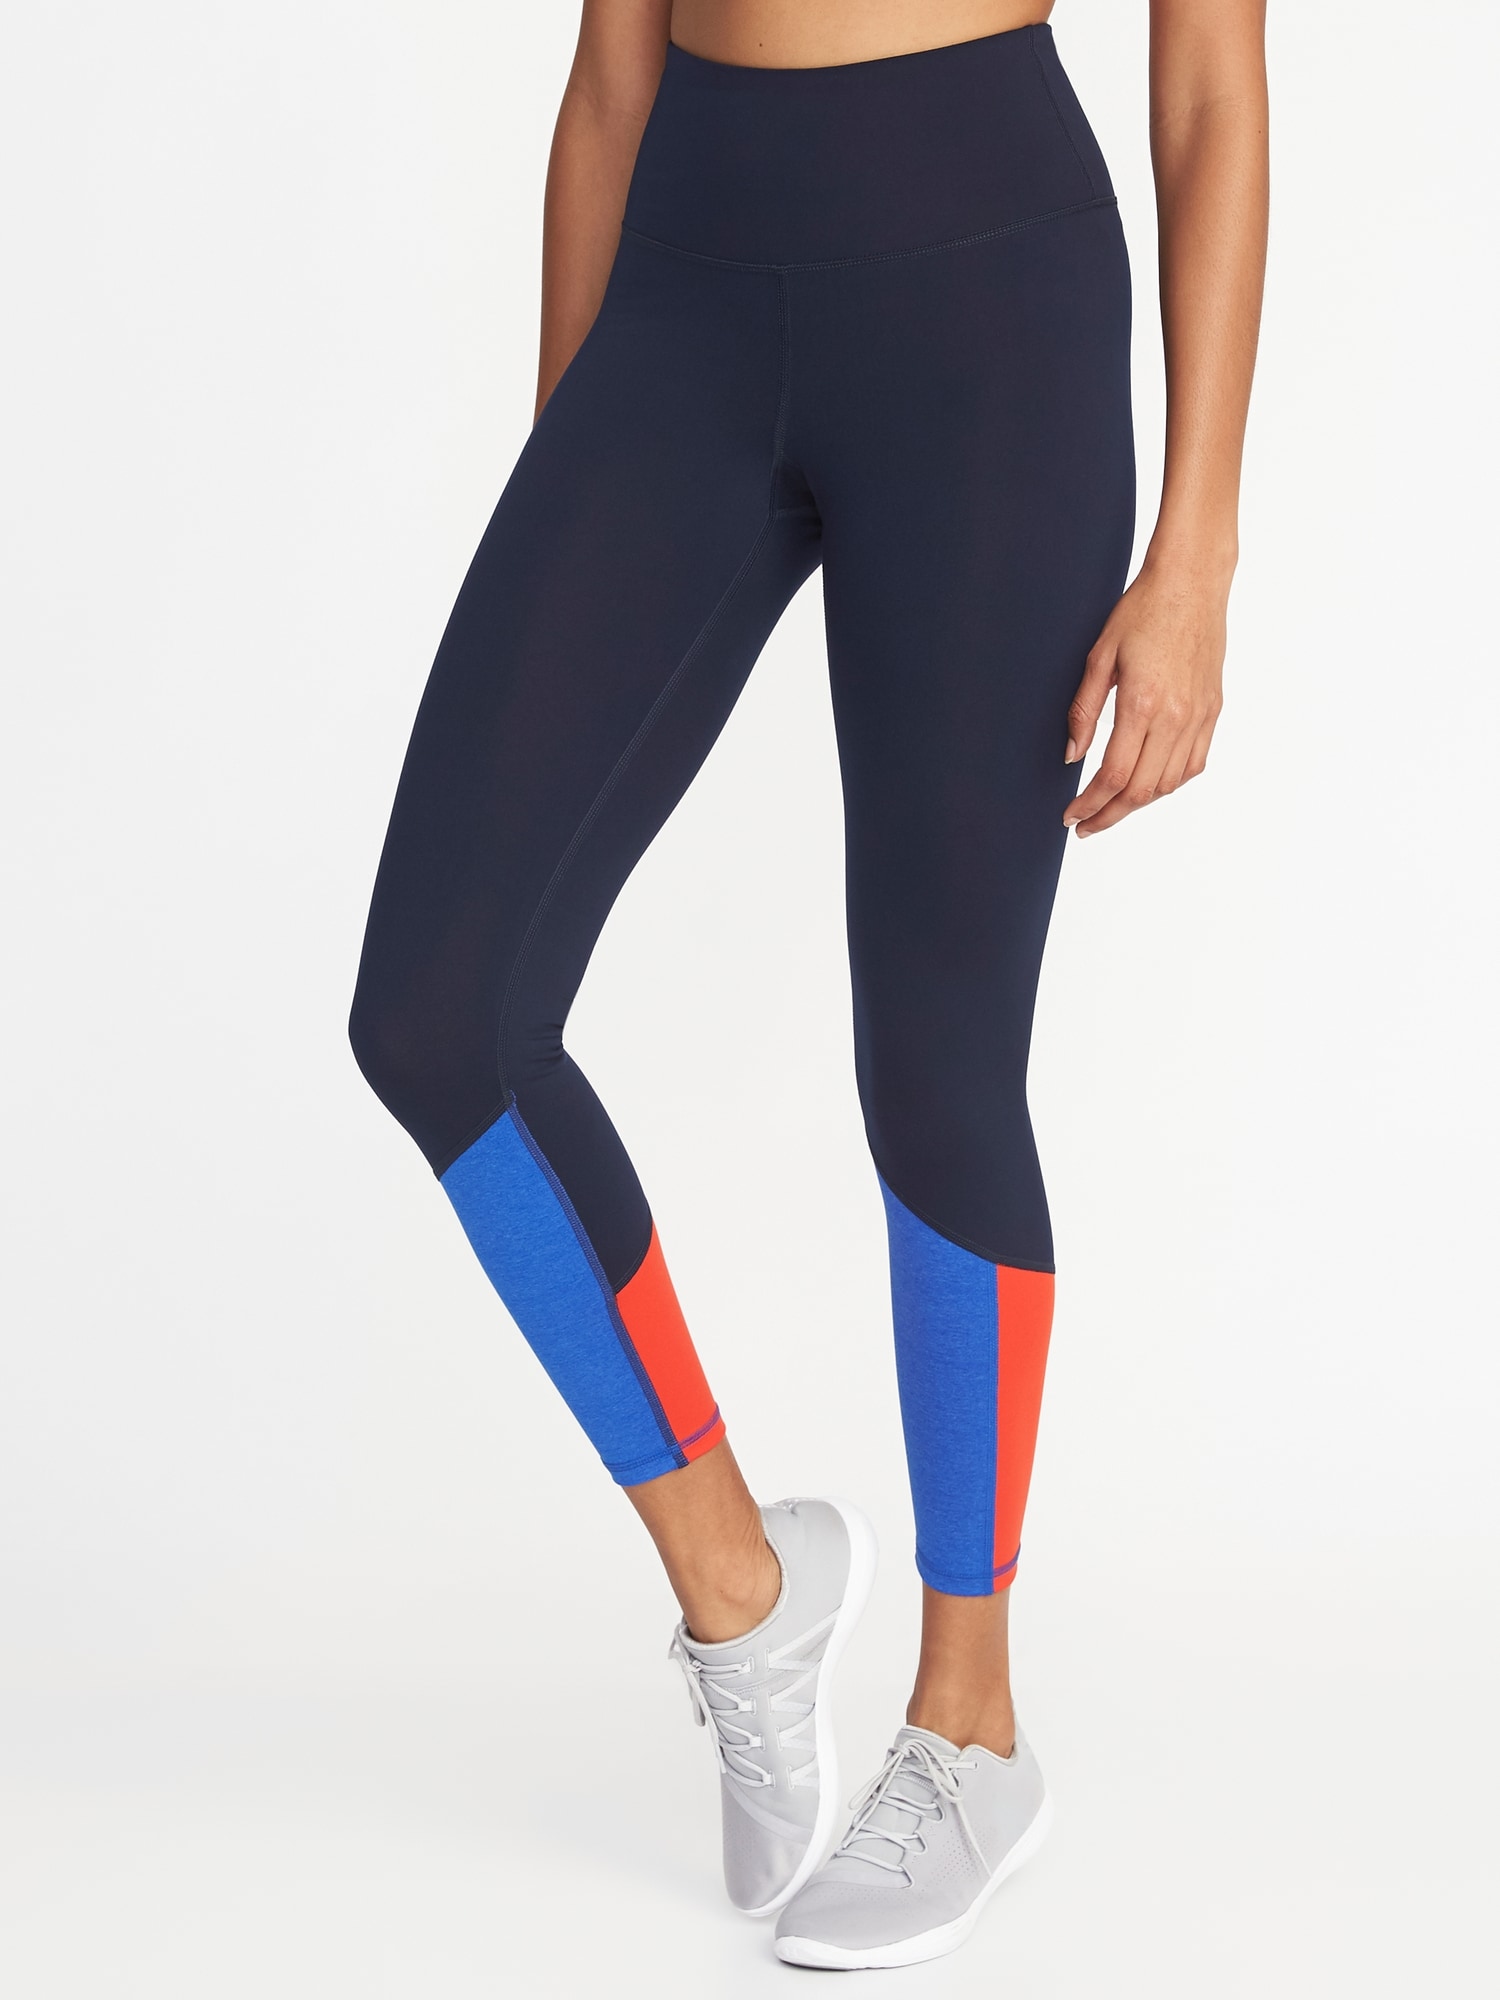 High Waisted Color Block Leggings, Tights With Great Support